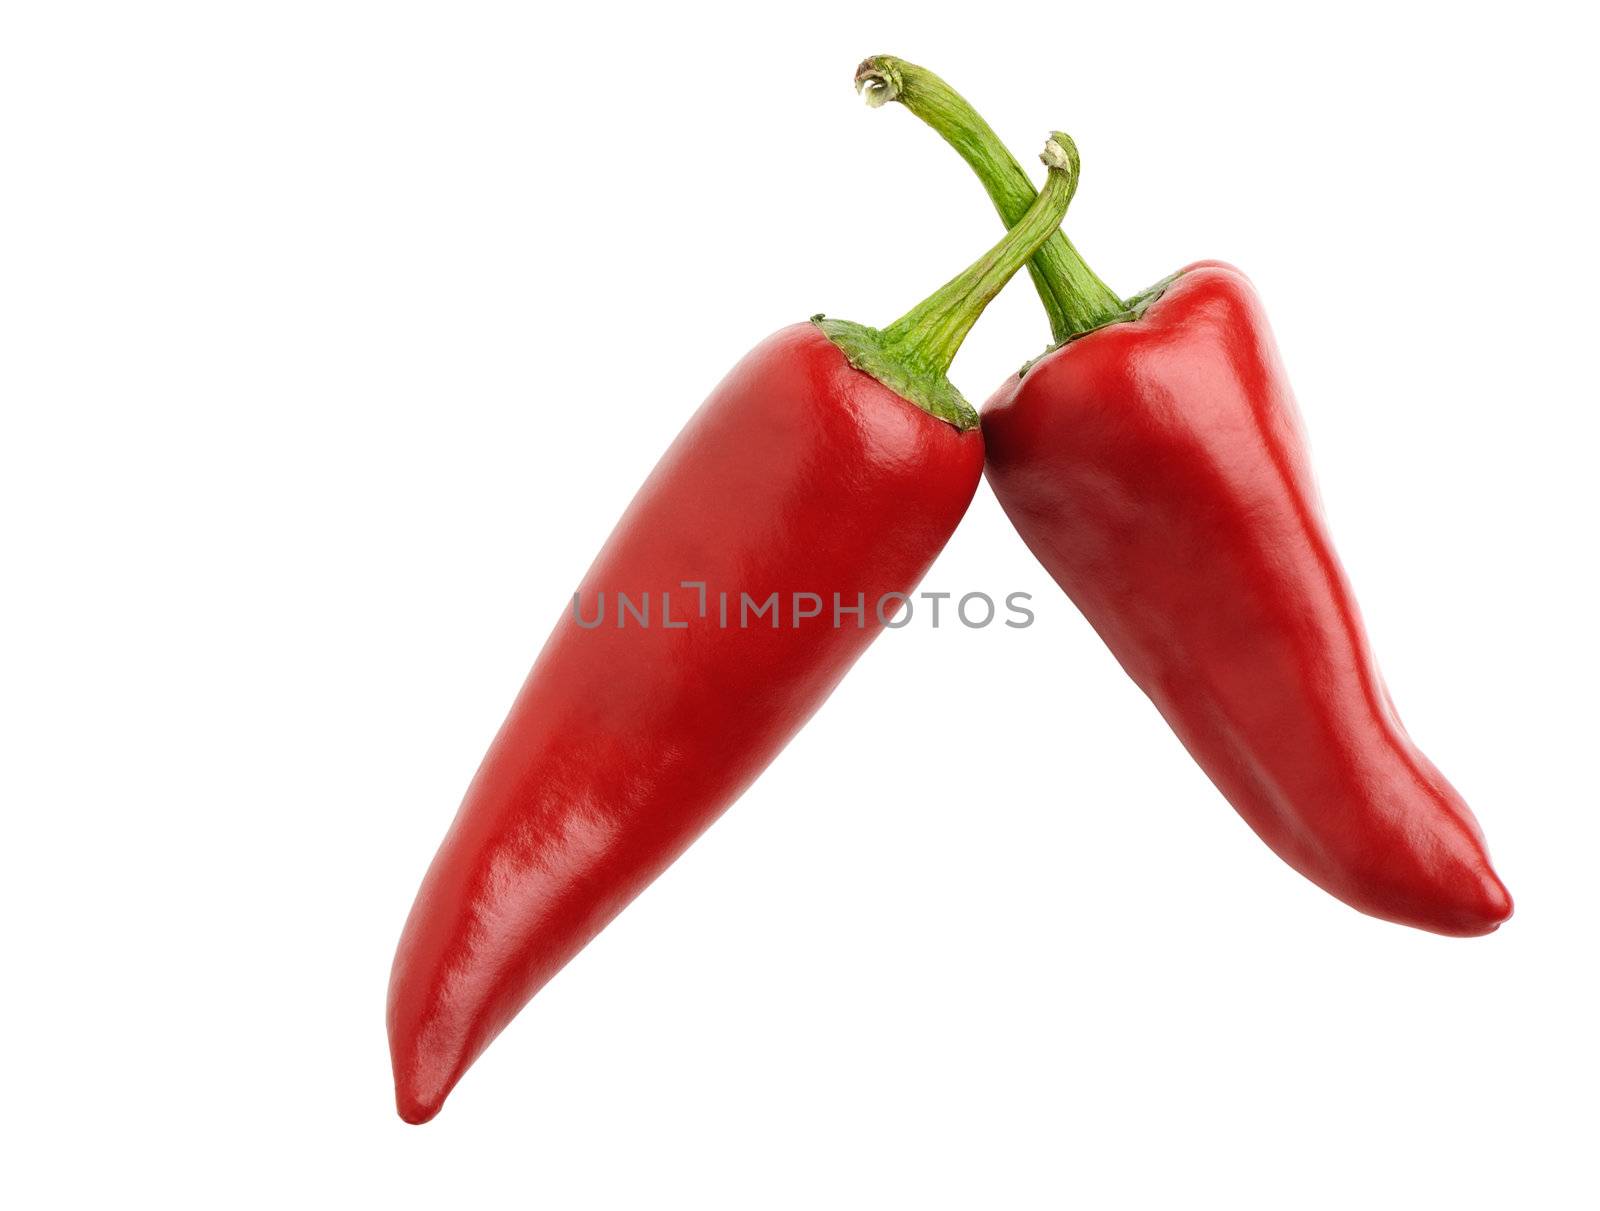 Two red bitter pepper by galdzer